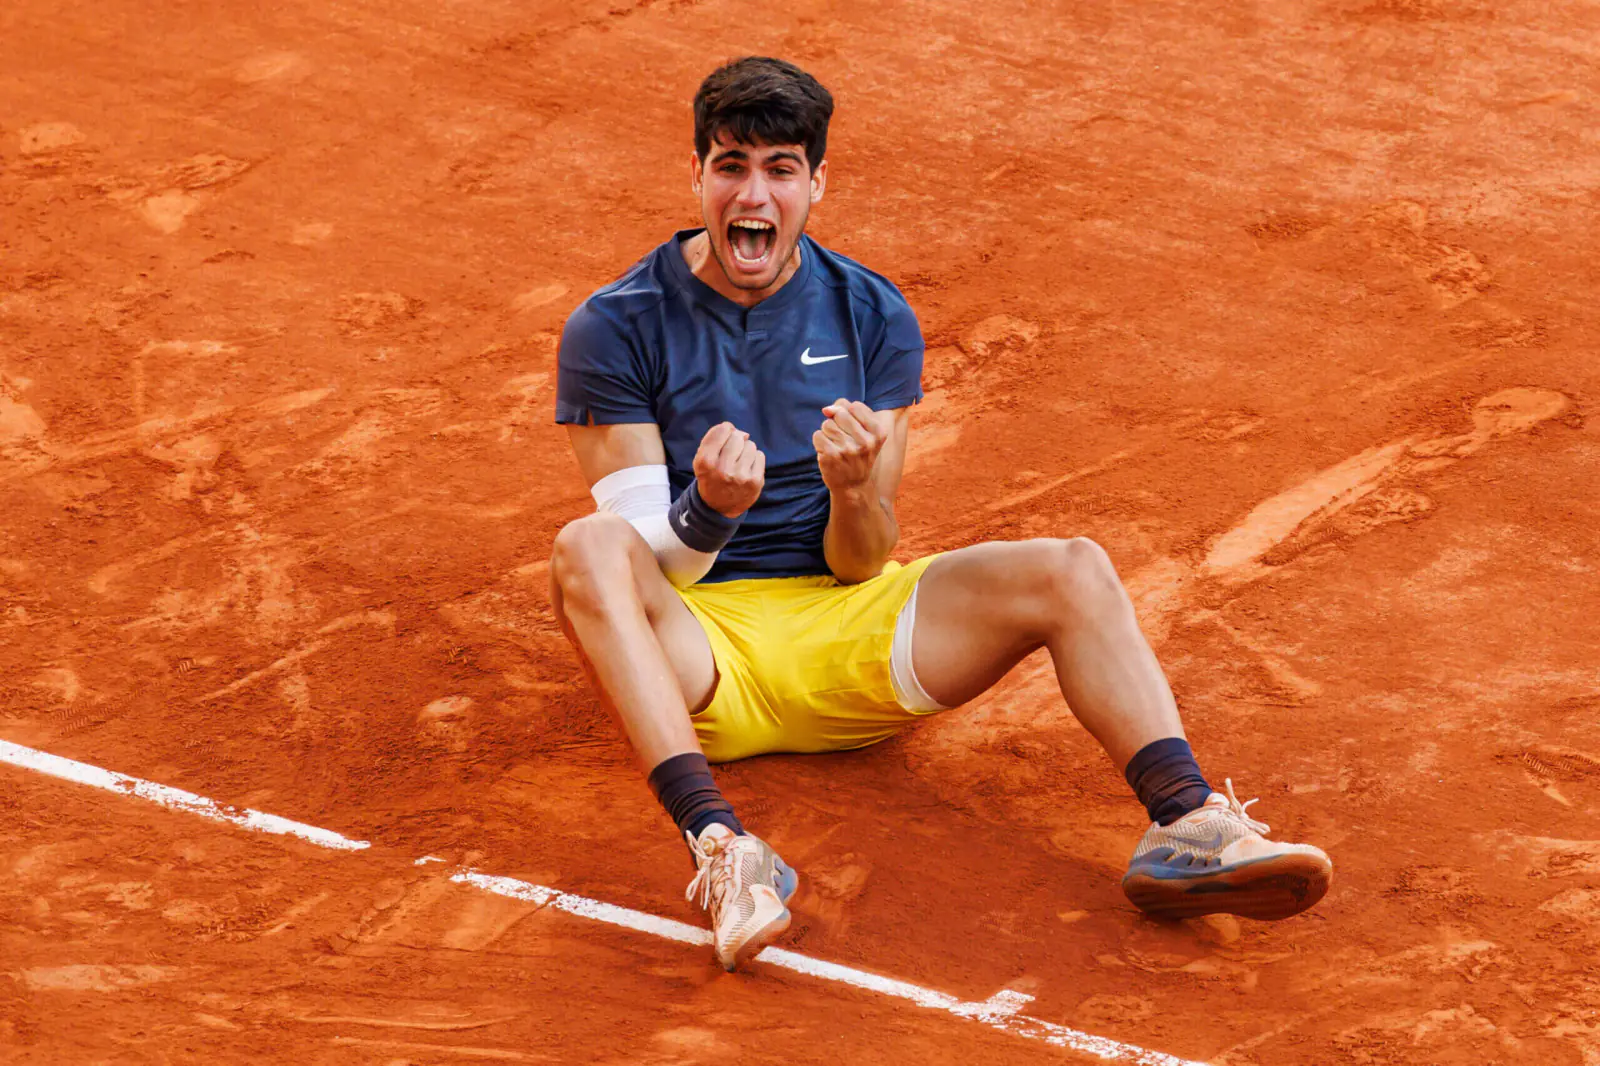 Carlos Alcaraz creates history, wins first French Open title by overcoming Zverev's tough challenge